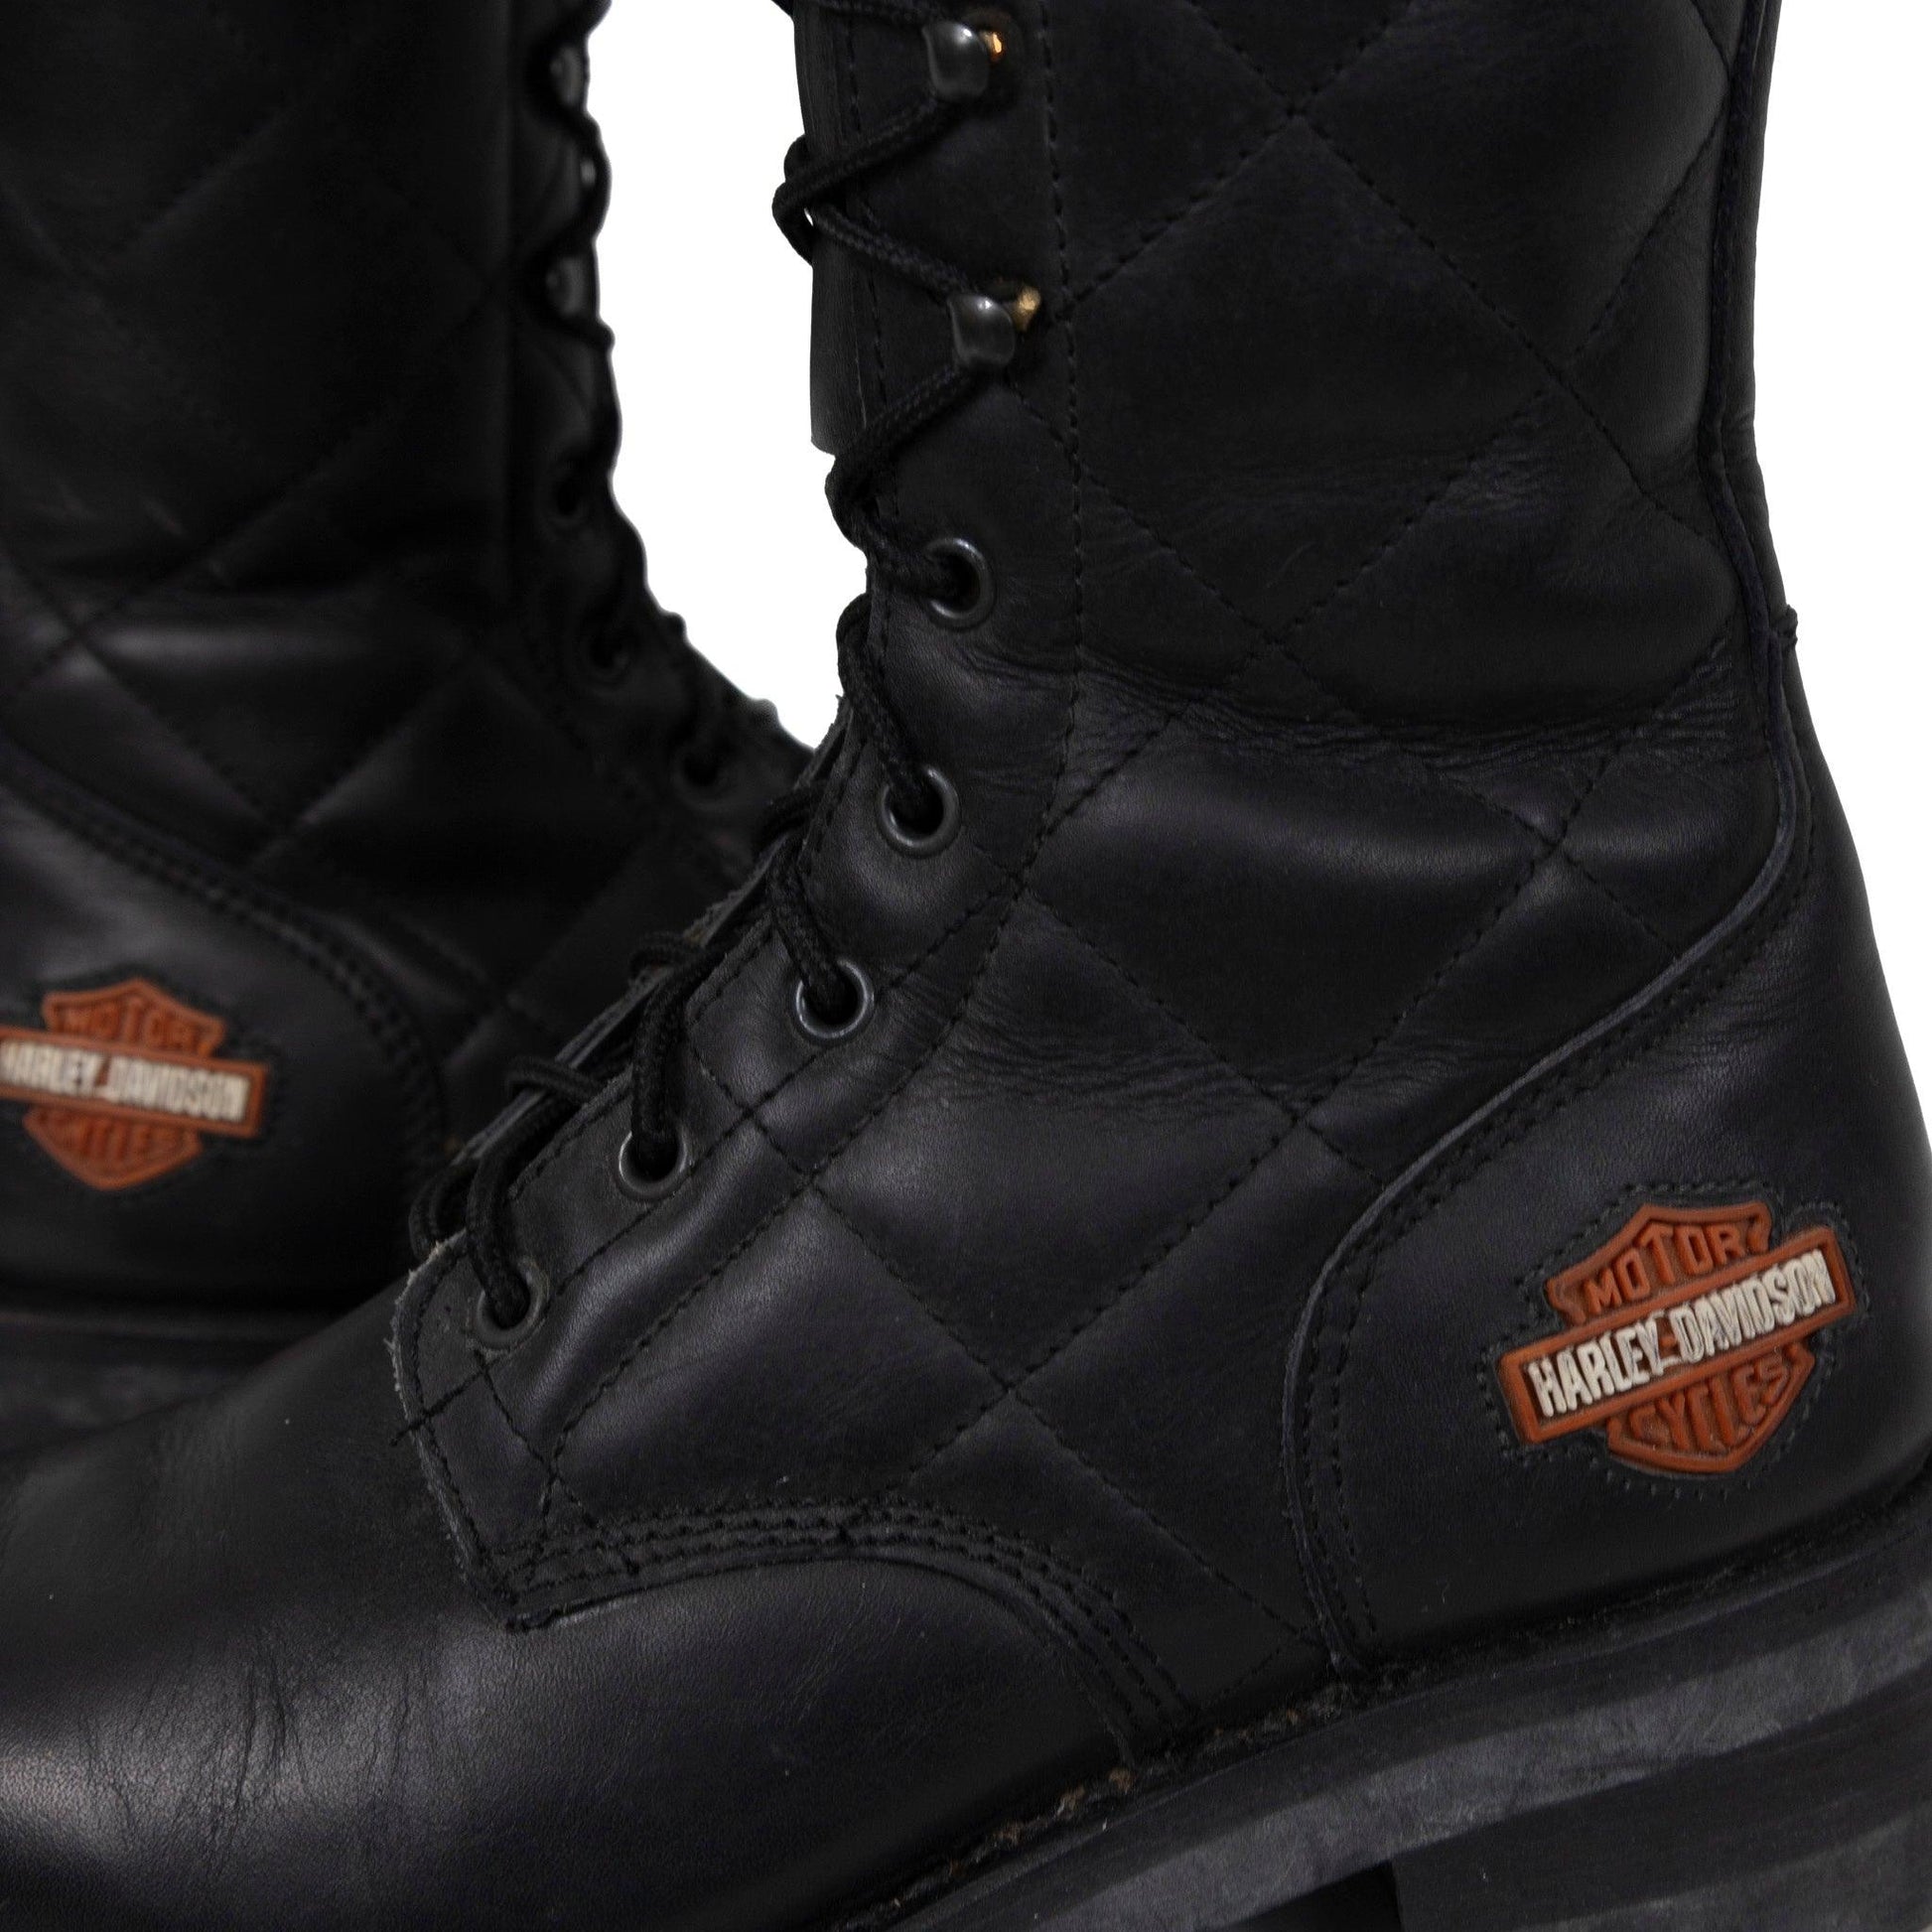 Harley Davidson Racing XR750 Lace Up Biker Boots - Known Source